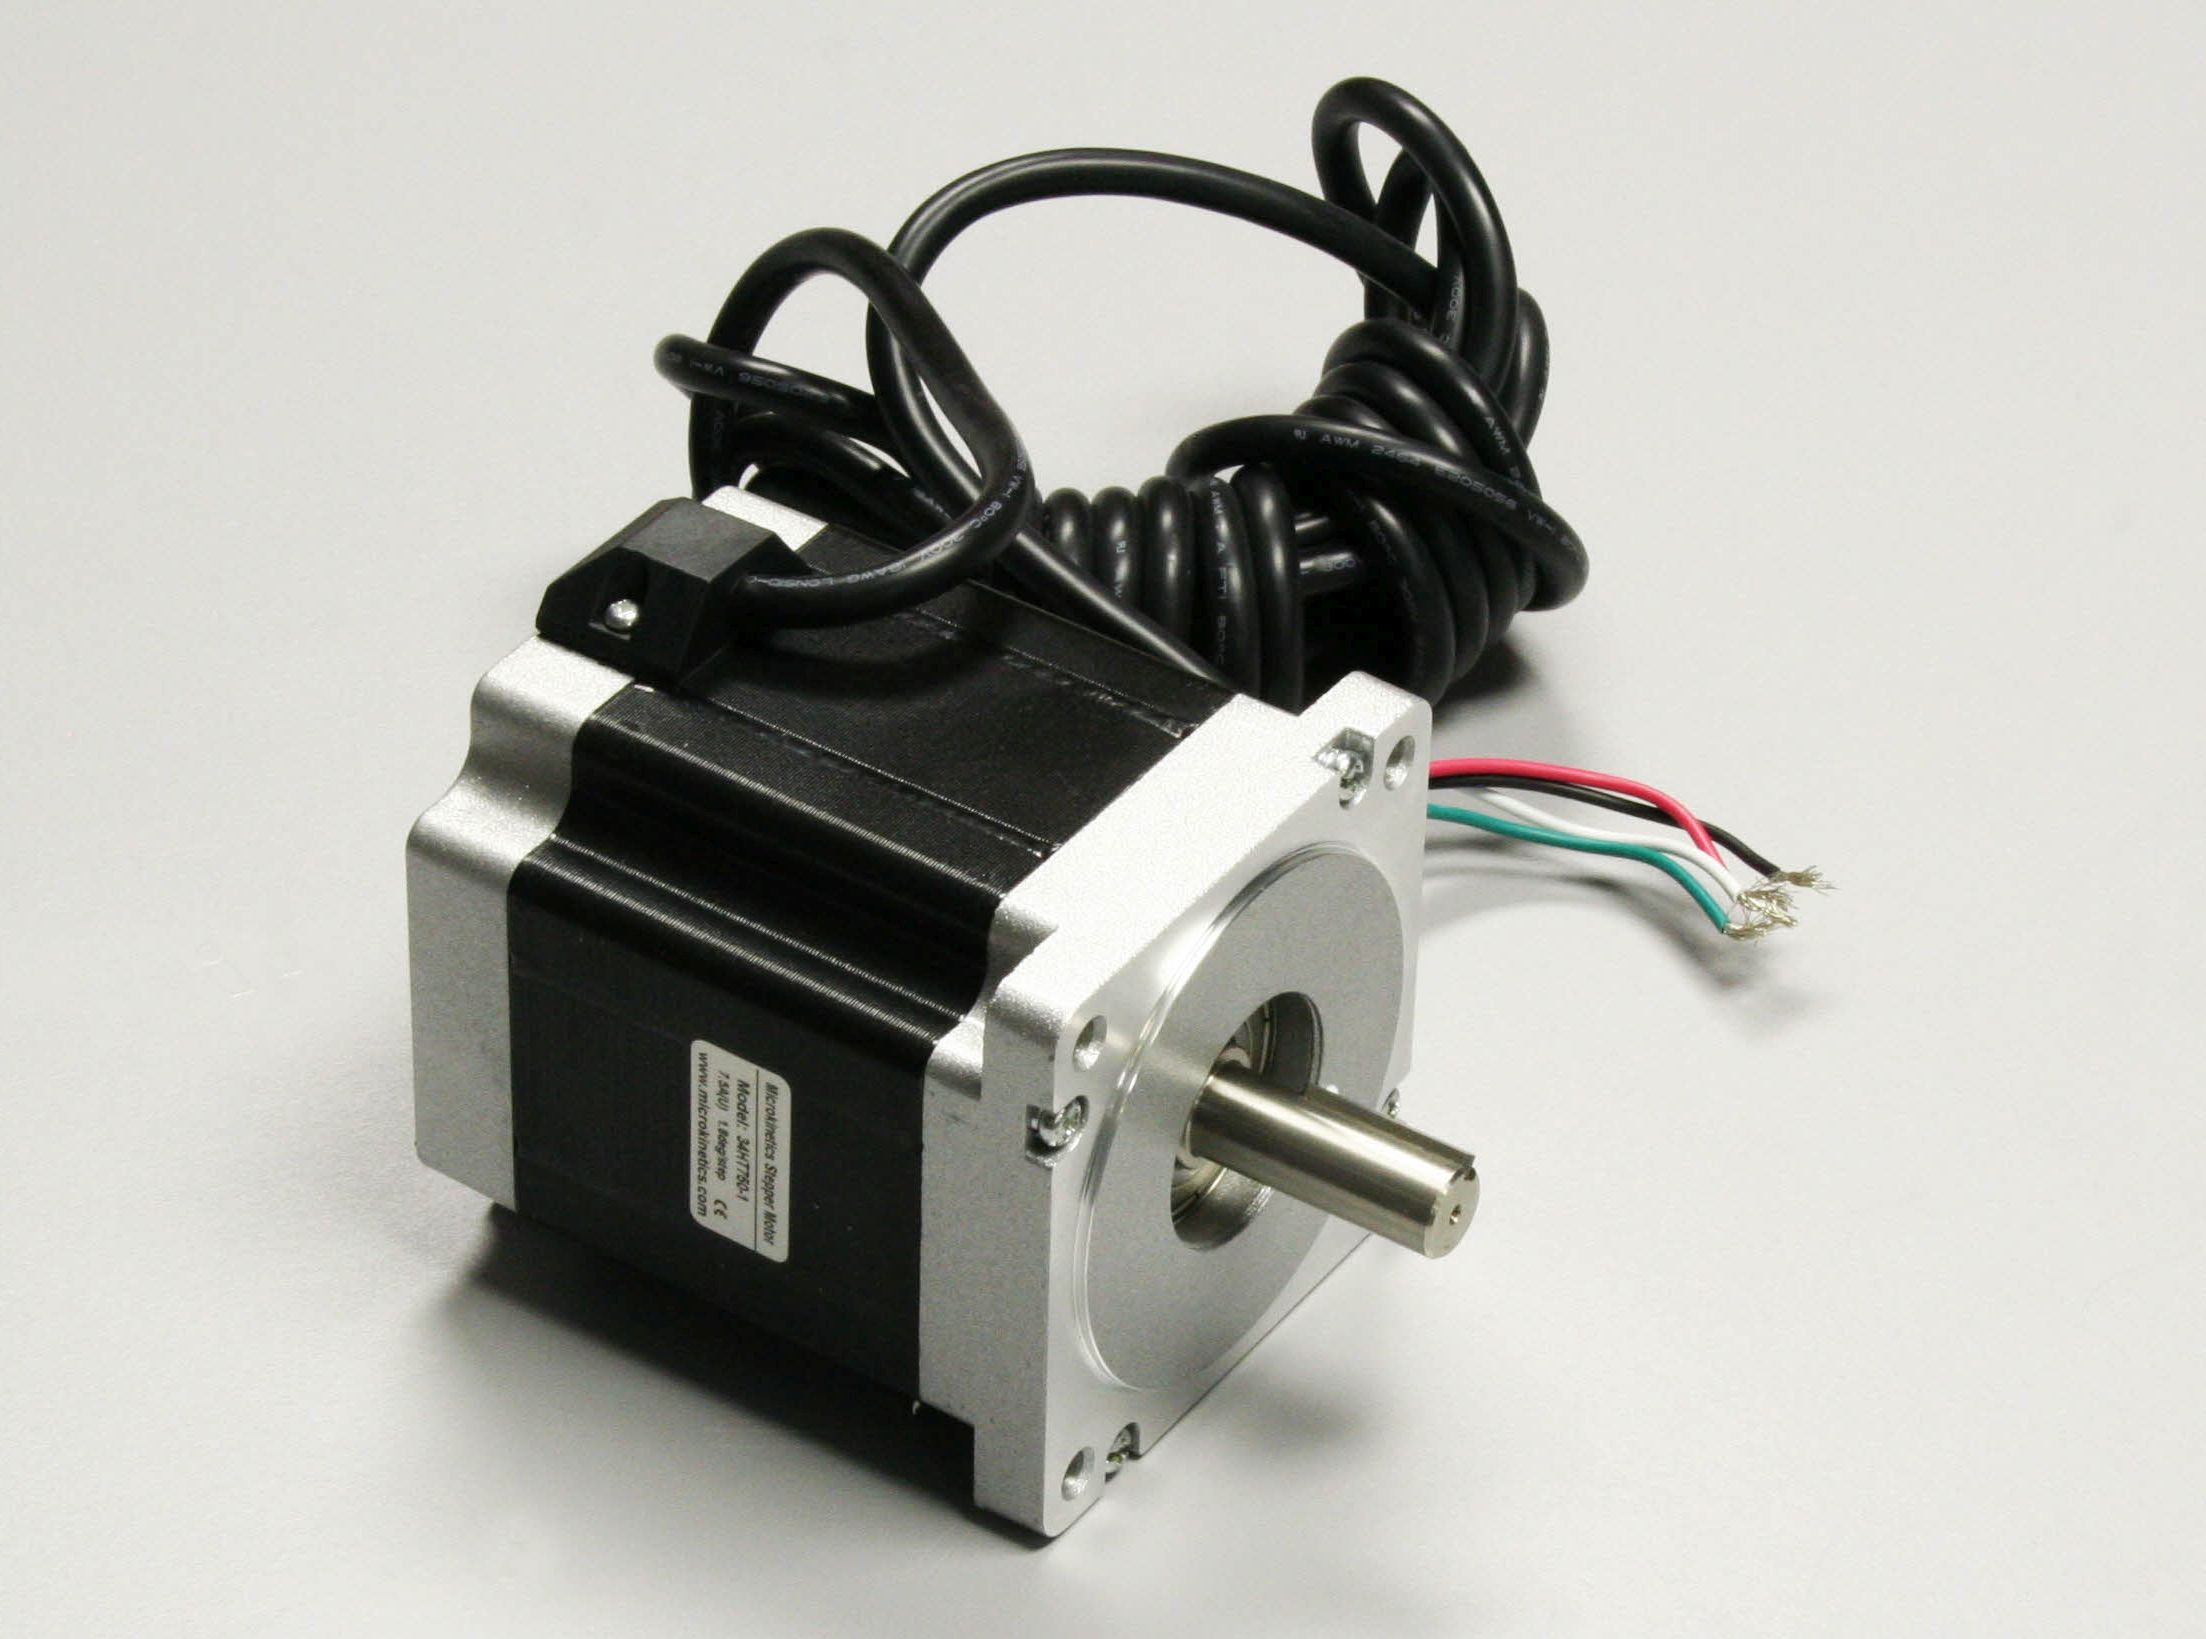 13HT750 motor with armored cable